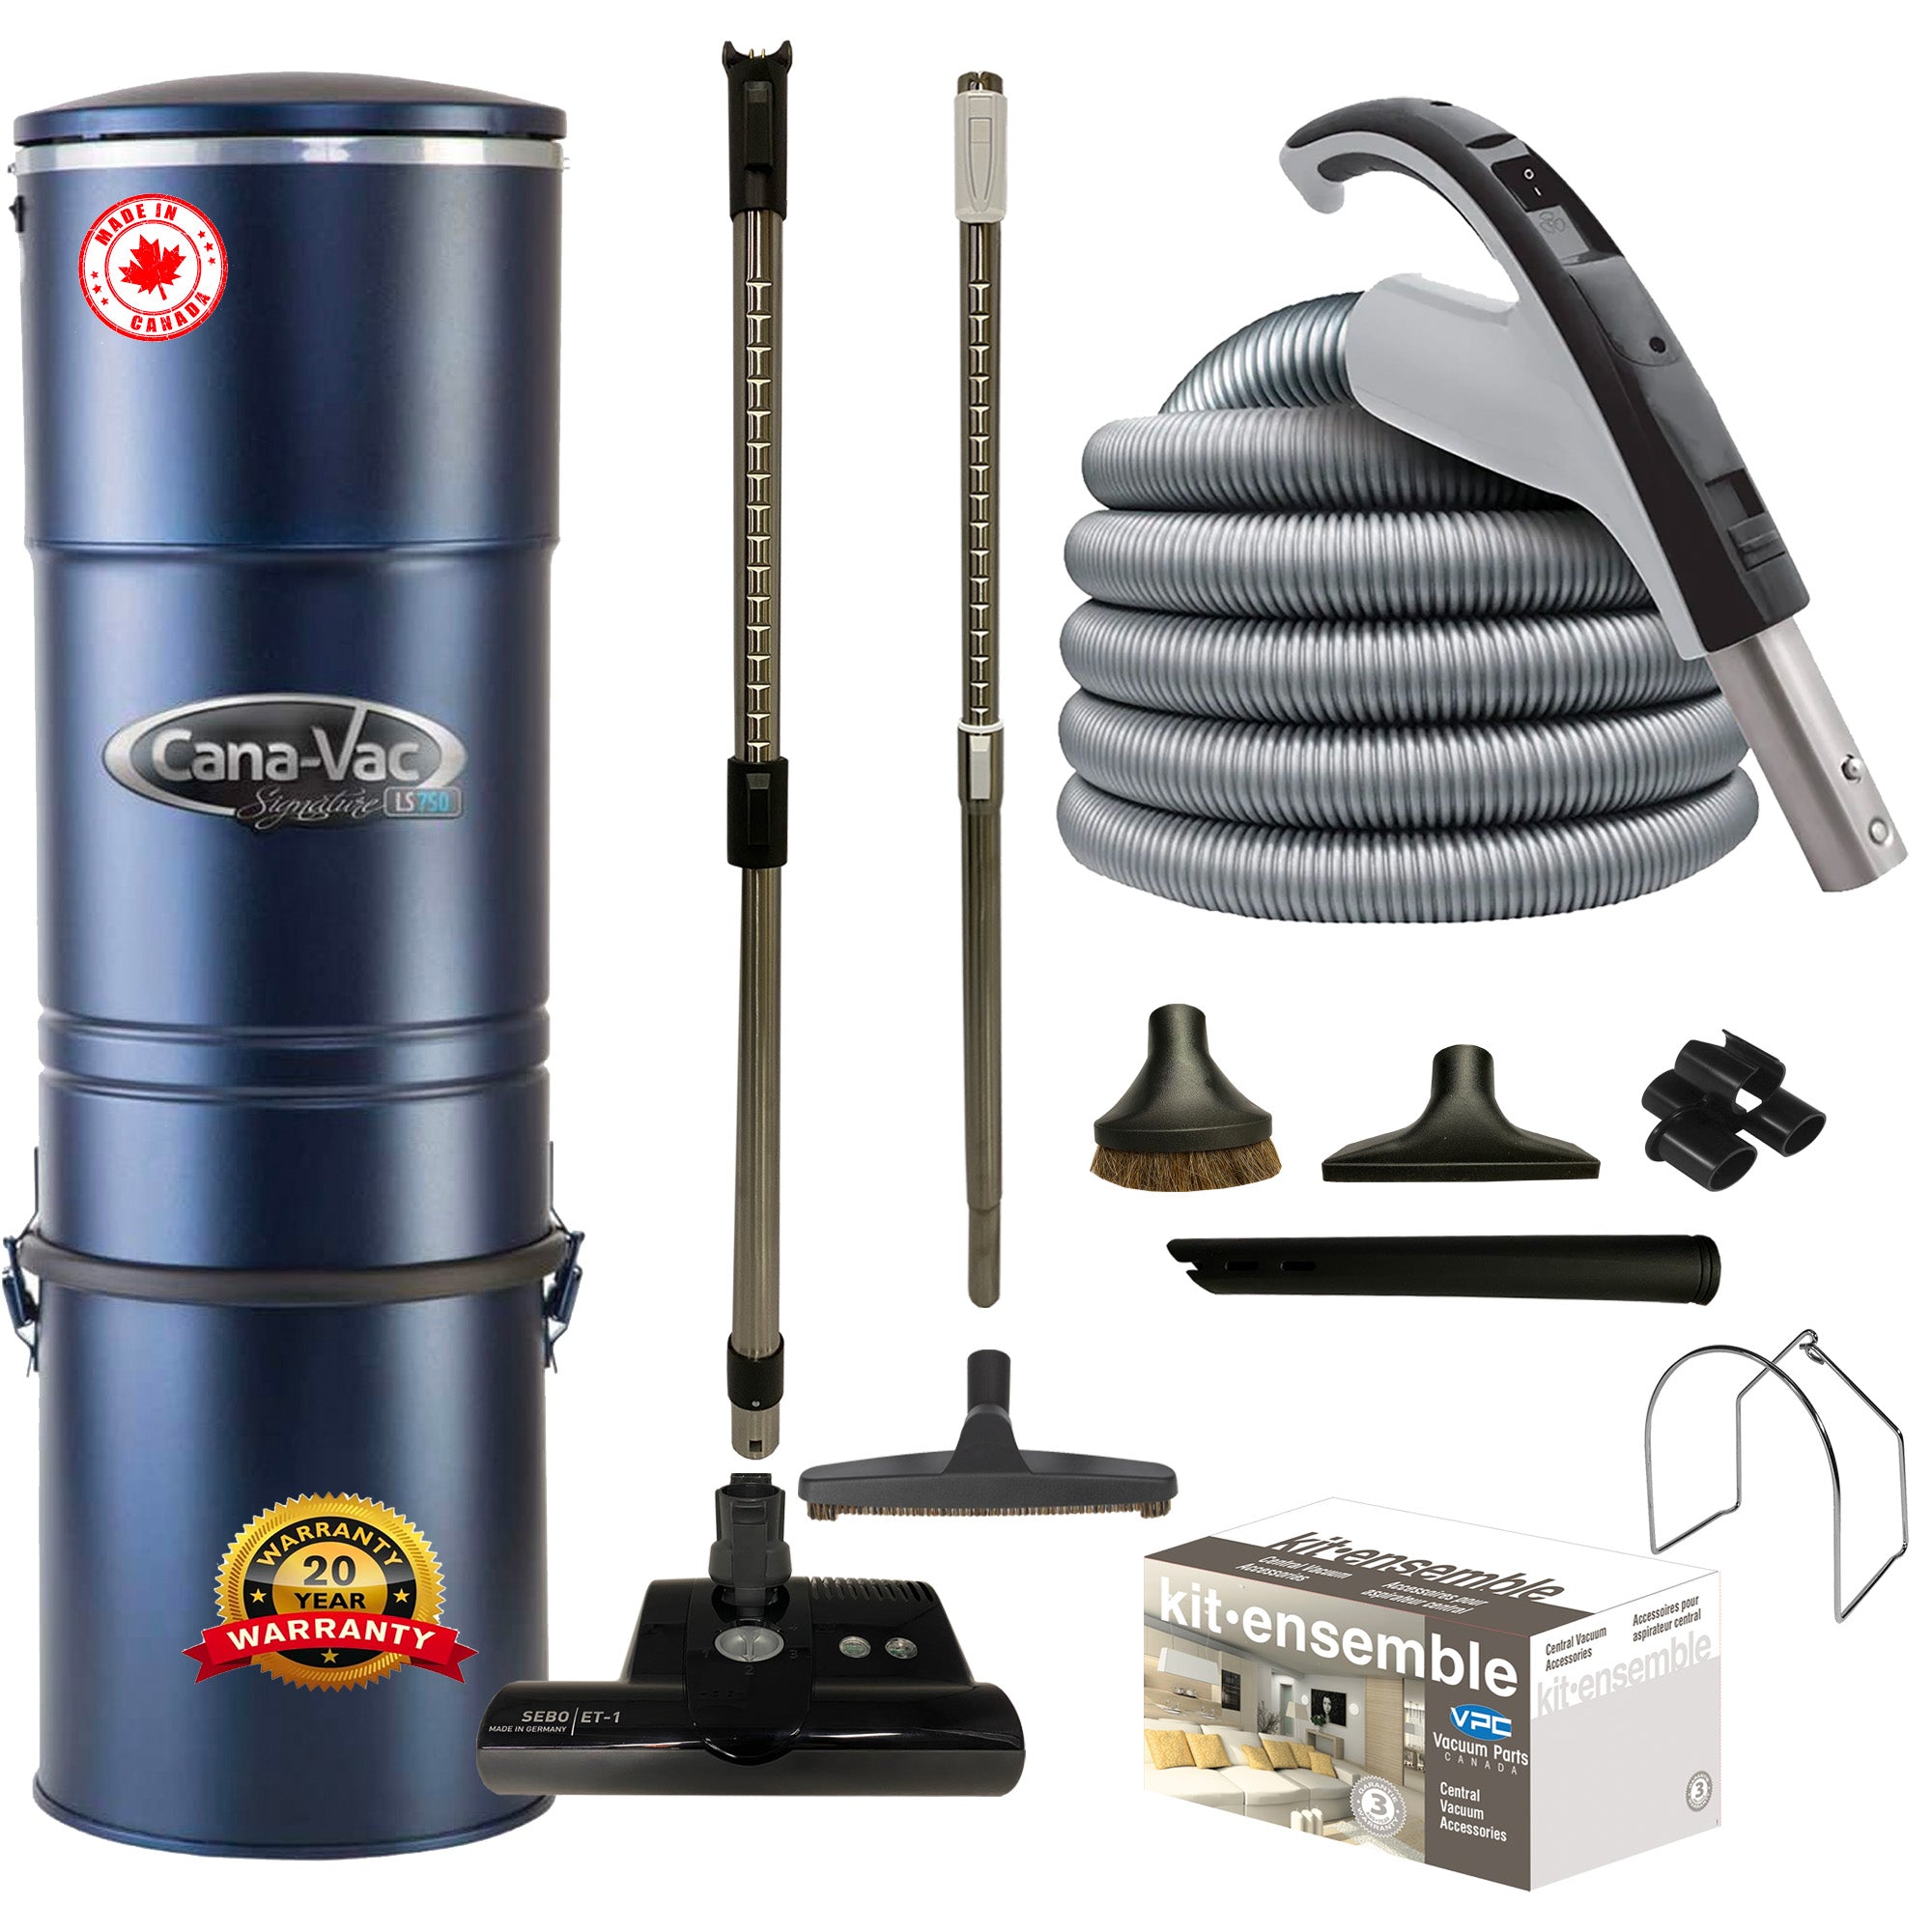 CanaVac LS790 Central Vacuum Cleaner with Premium Electric Package